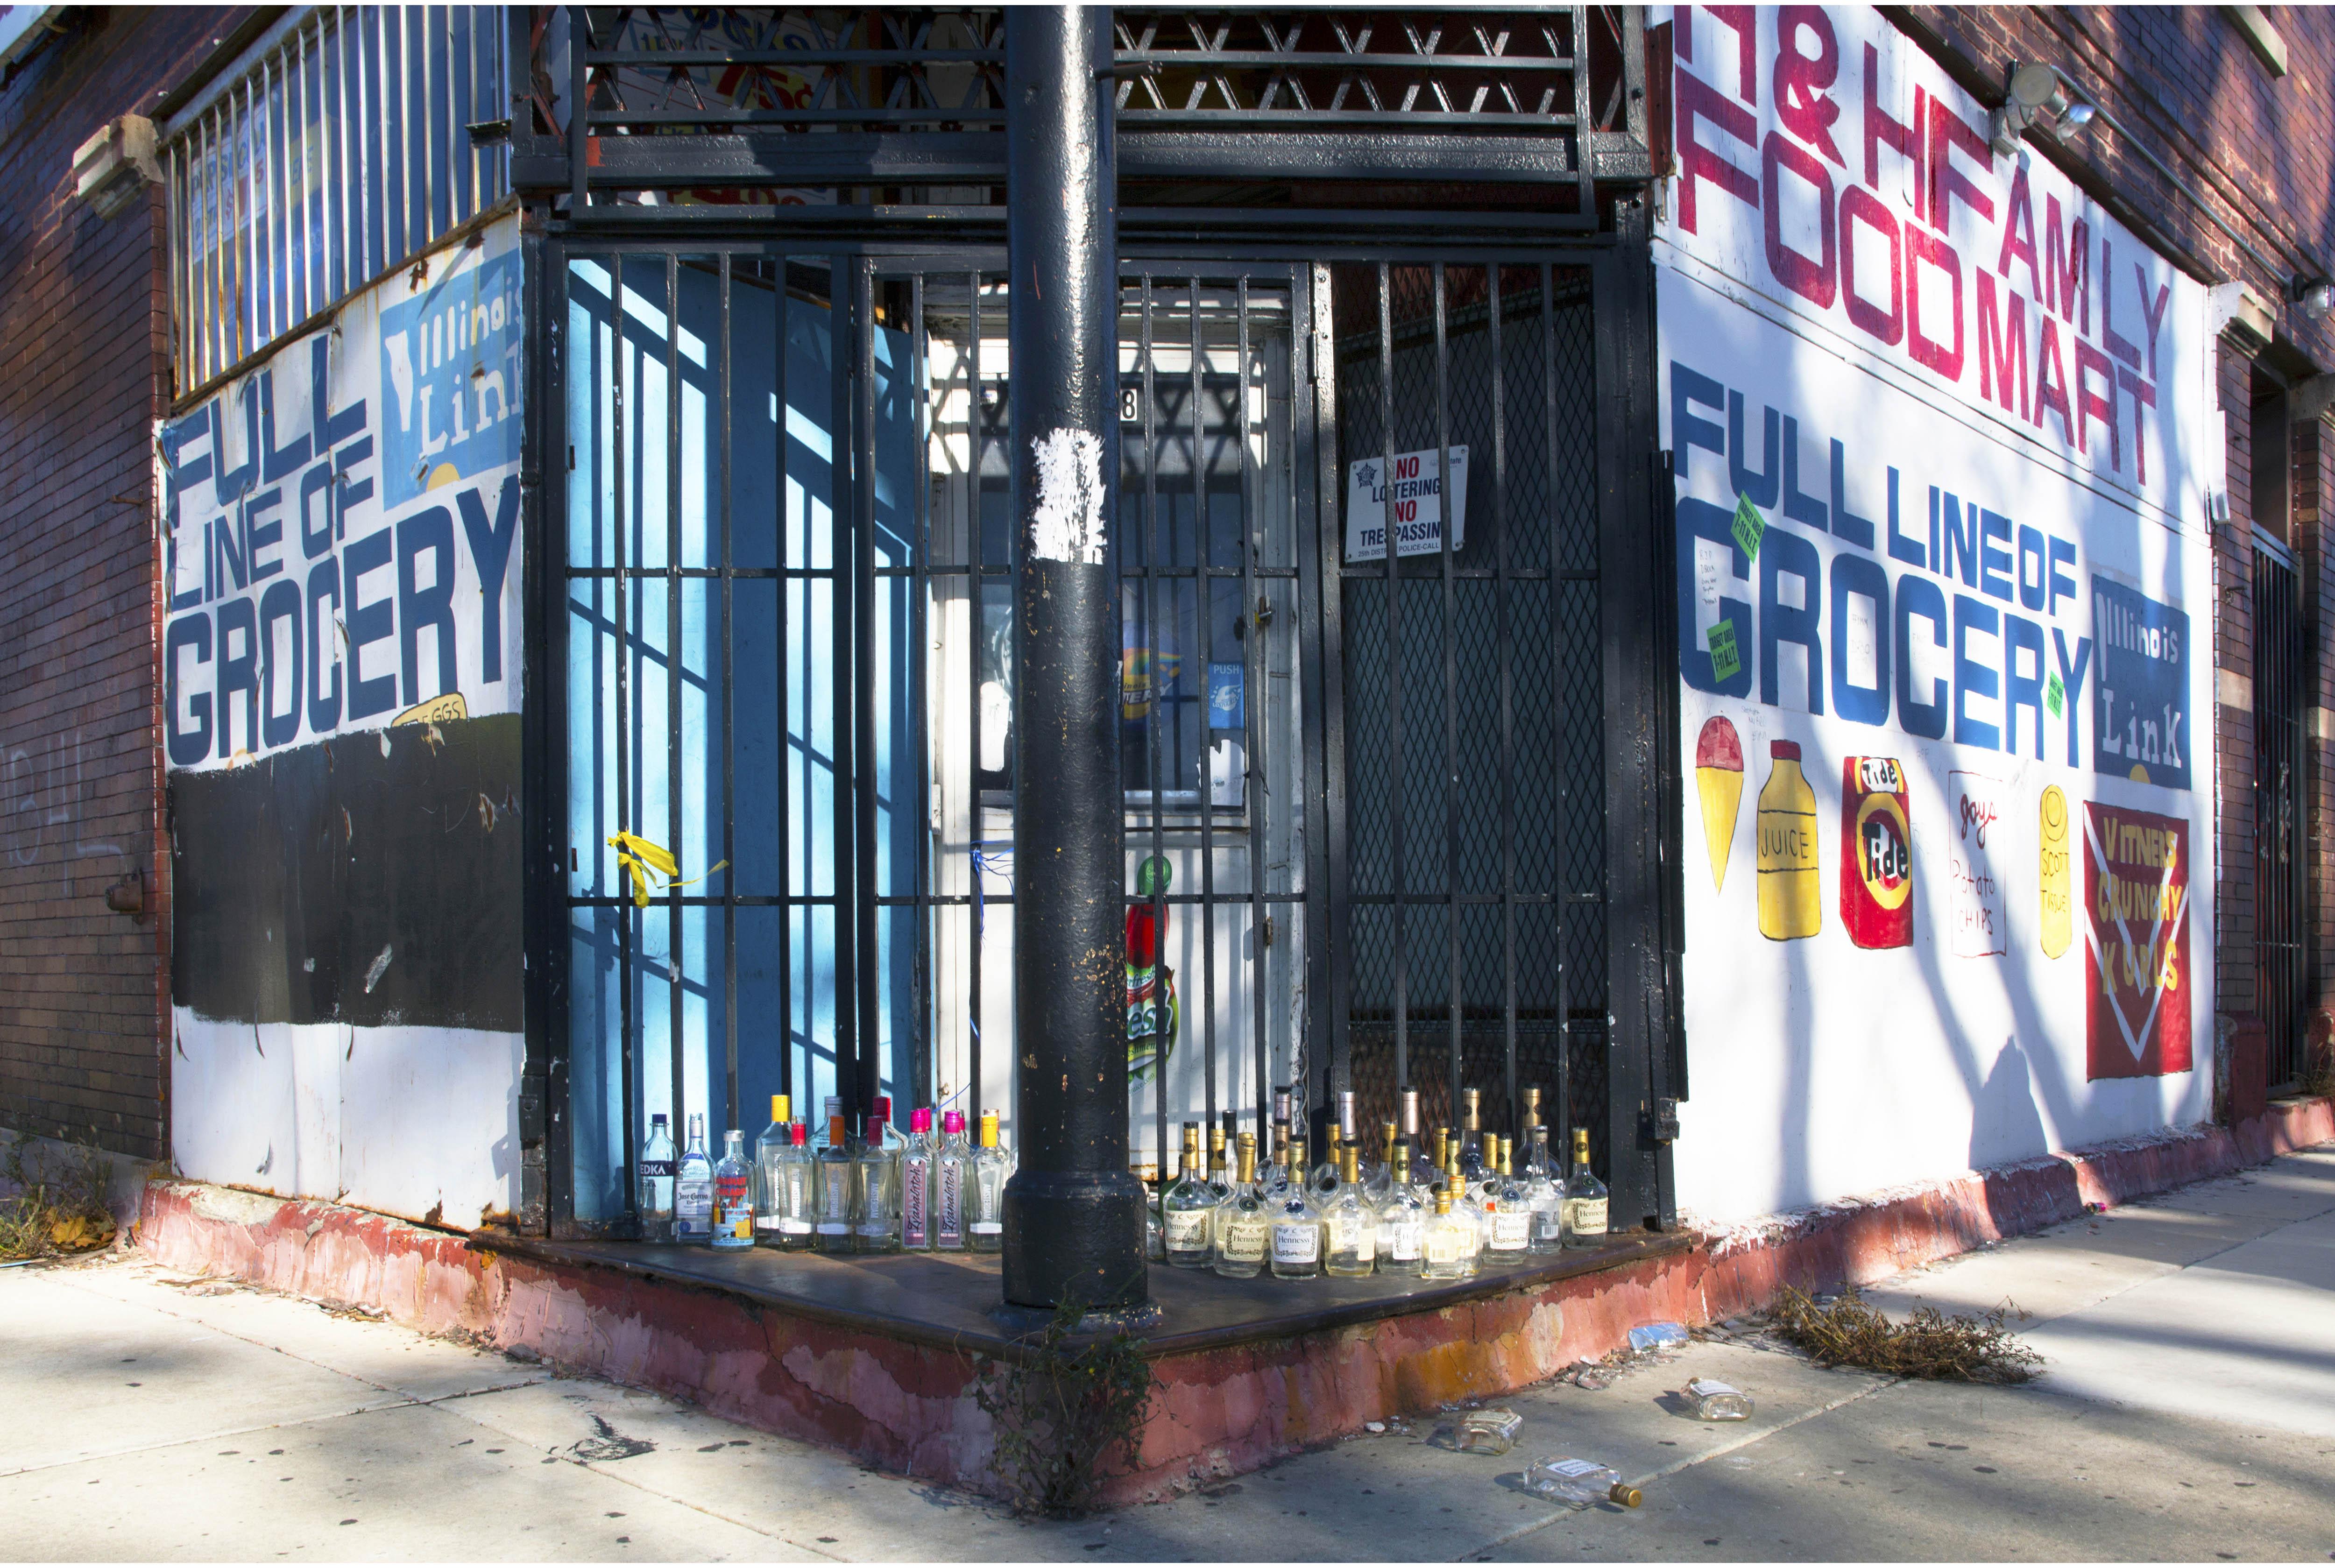 Rows of liquor bottles pay homage to a man killed in Englewood. (Courtesy of Thomas Ferrella)